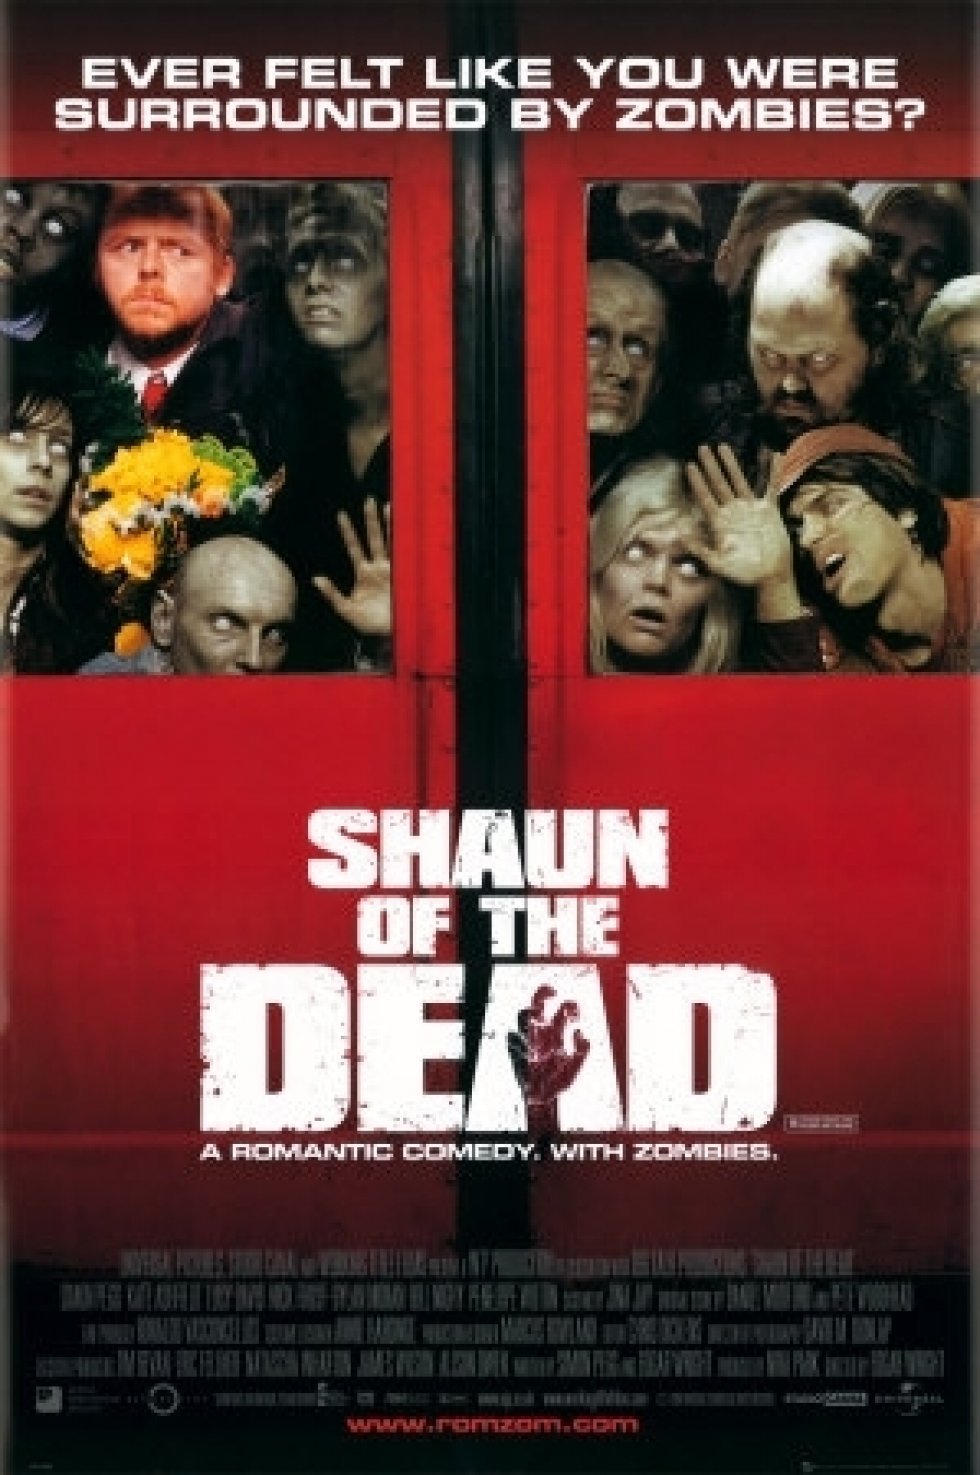 Shaun of the dead - Universal Pictures - Edgar Wright